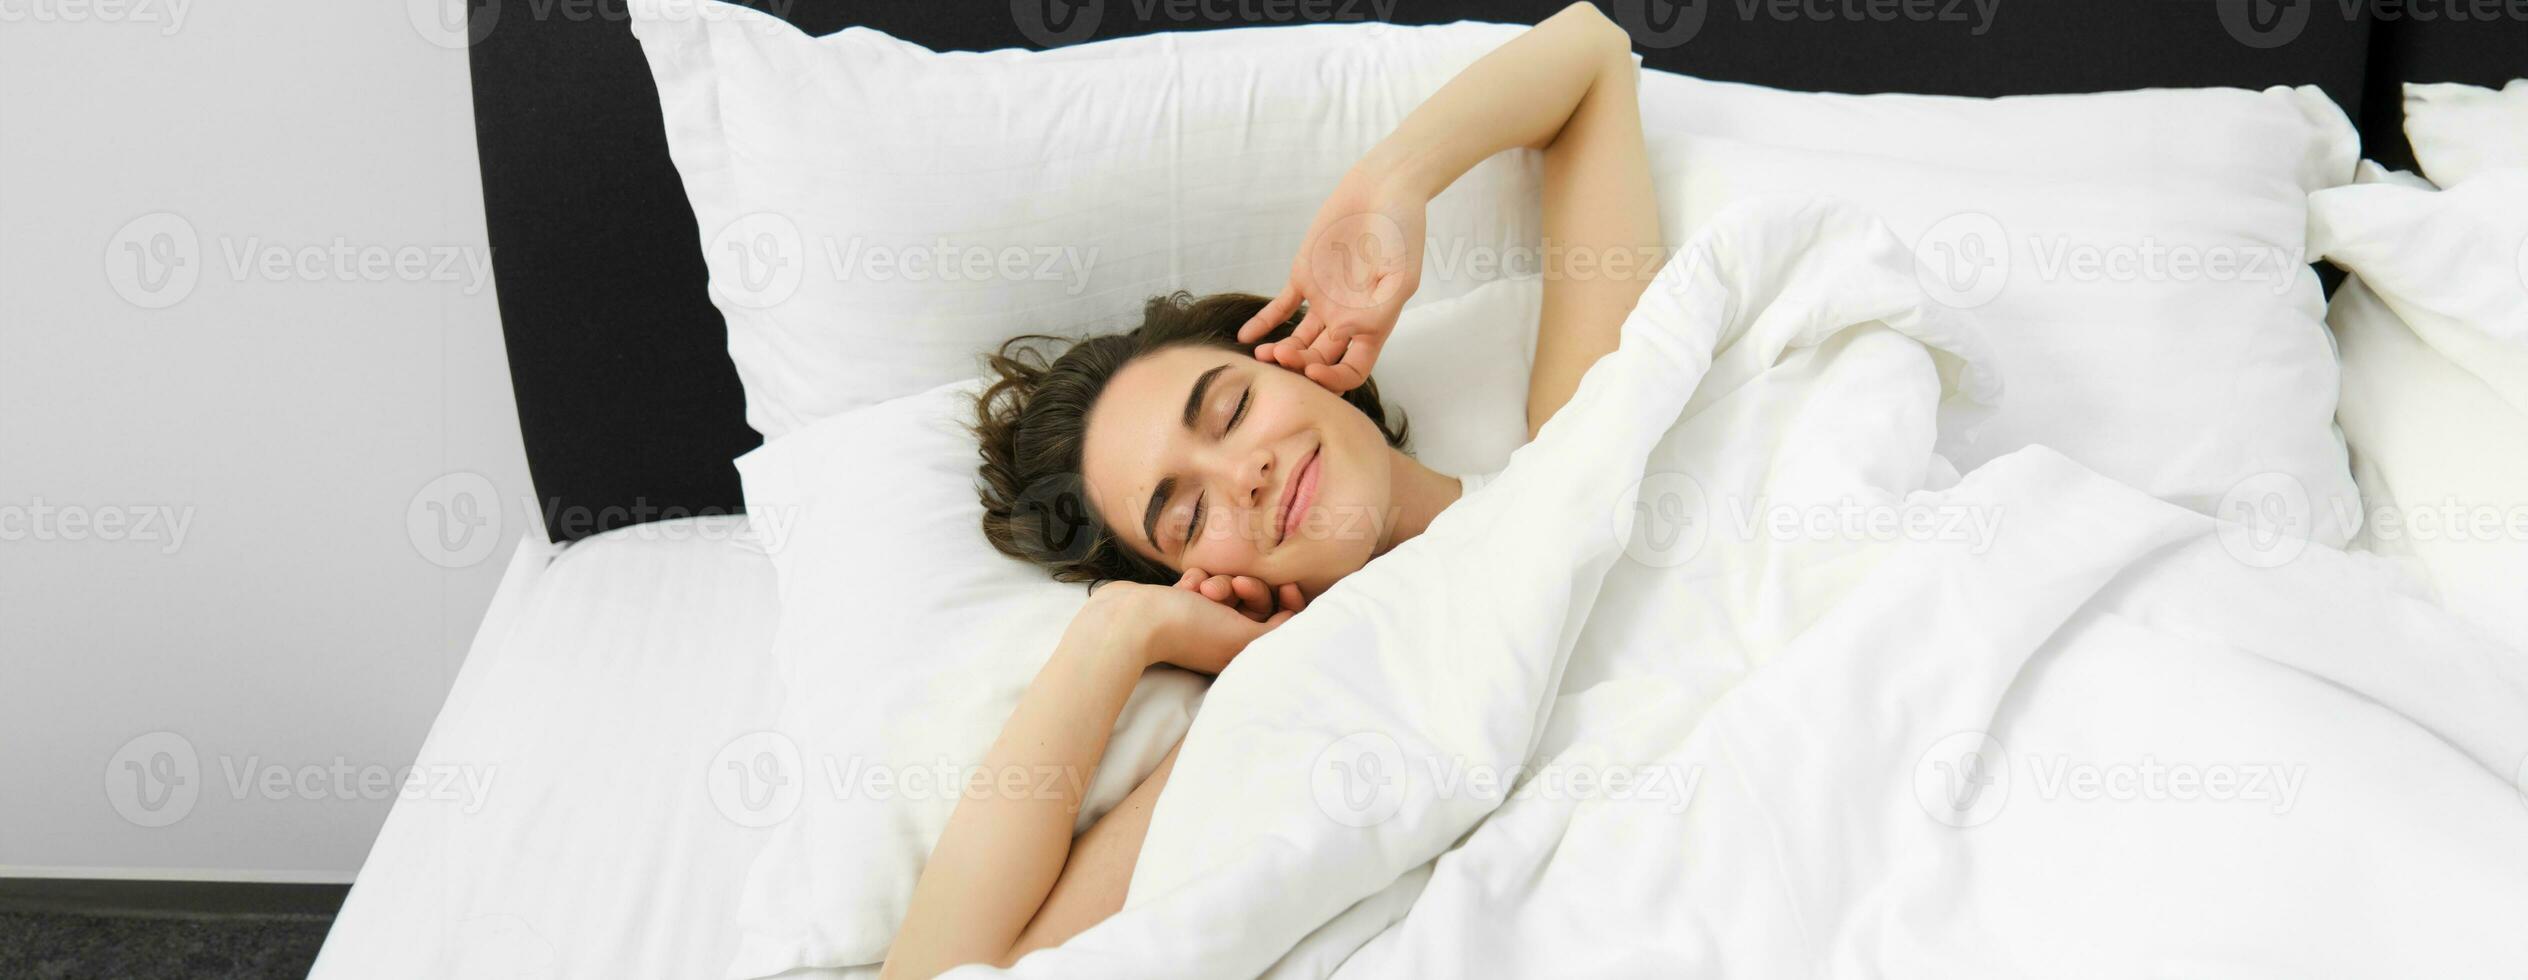 Portrait of smiling, pleased young woman stretching her arms, waking up after good night sleep, lying on soft white pillow in bed with comfortable linen sheets photo